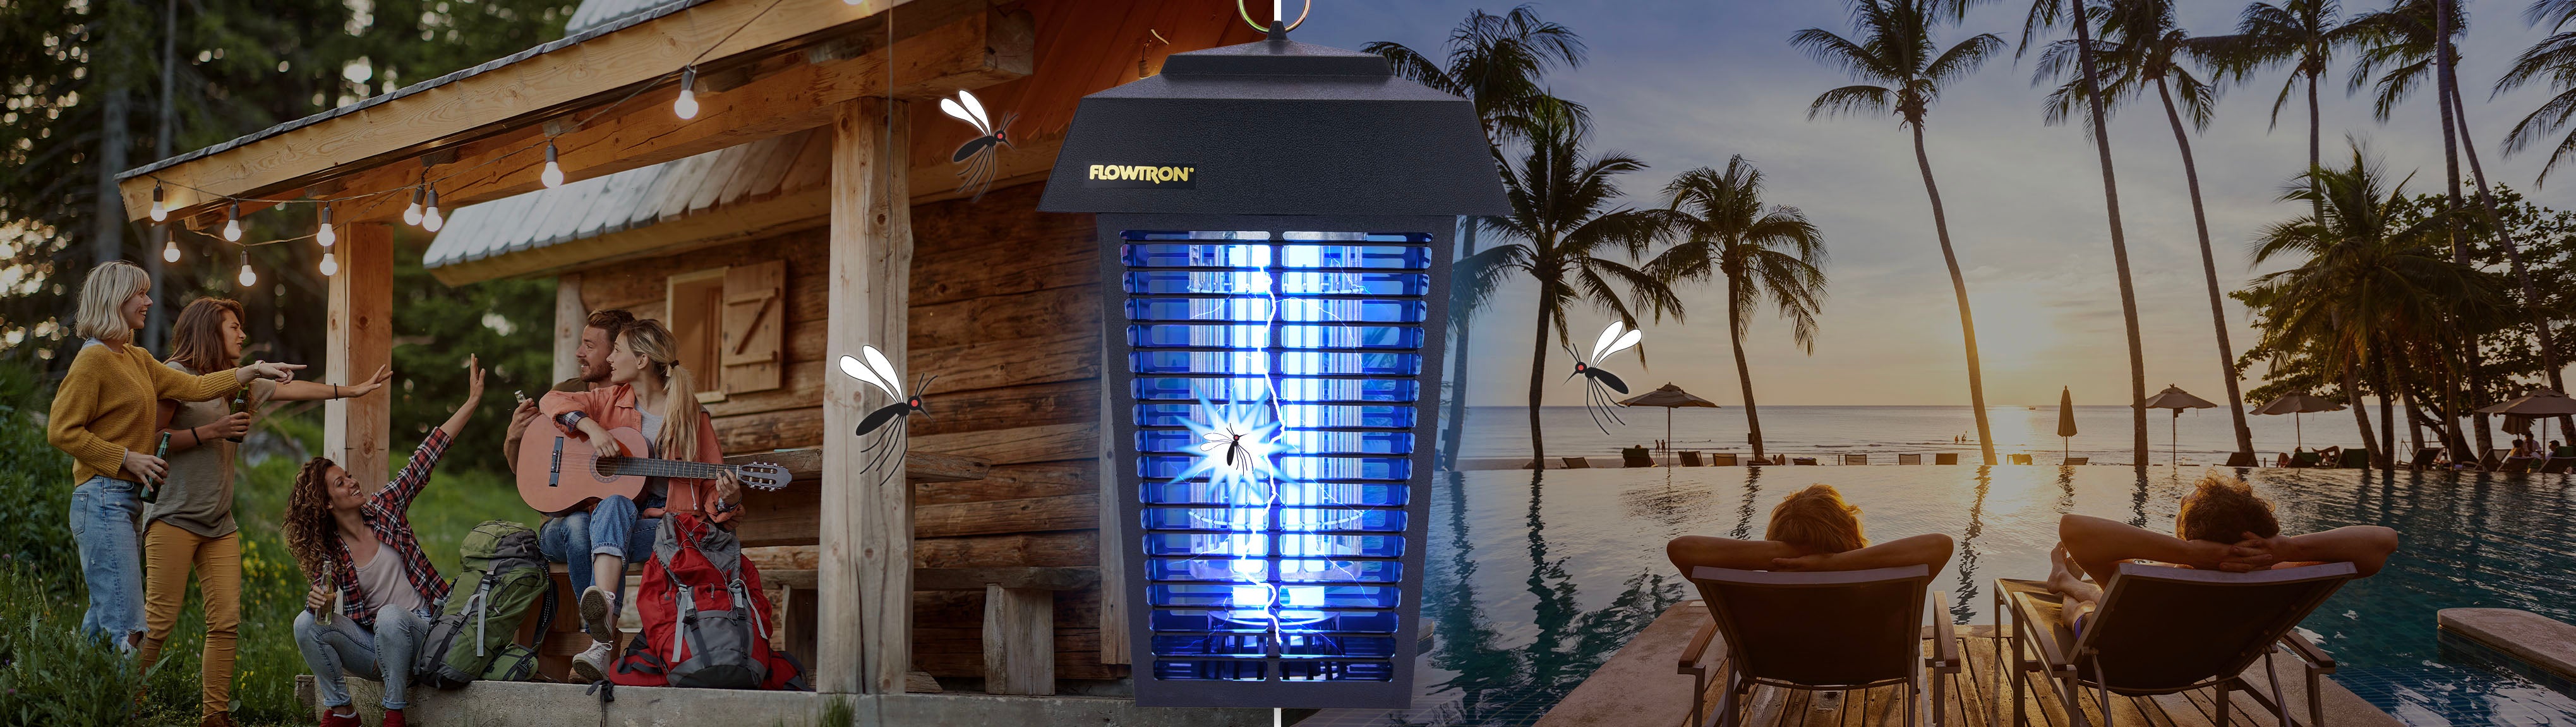 Zap Away Your Resort’s Pest Problems: Flowtron Bug Zappers to the Rescue!